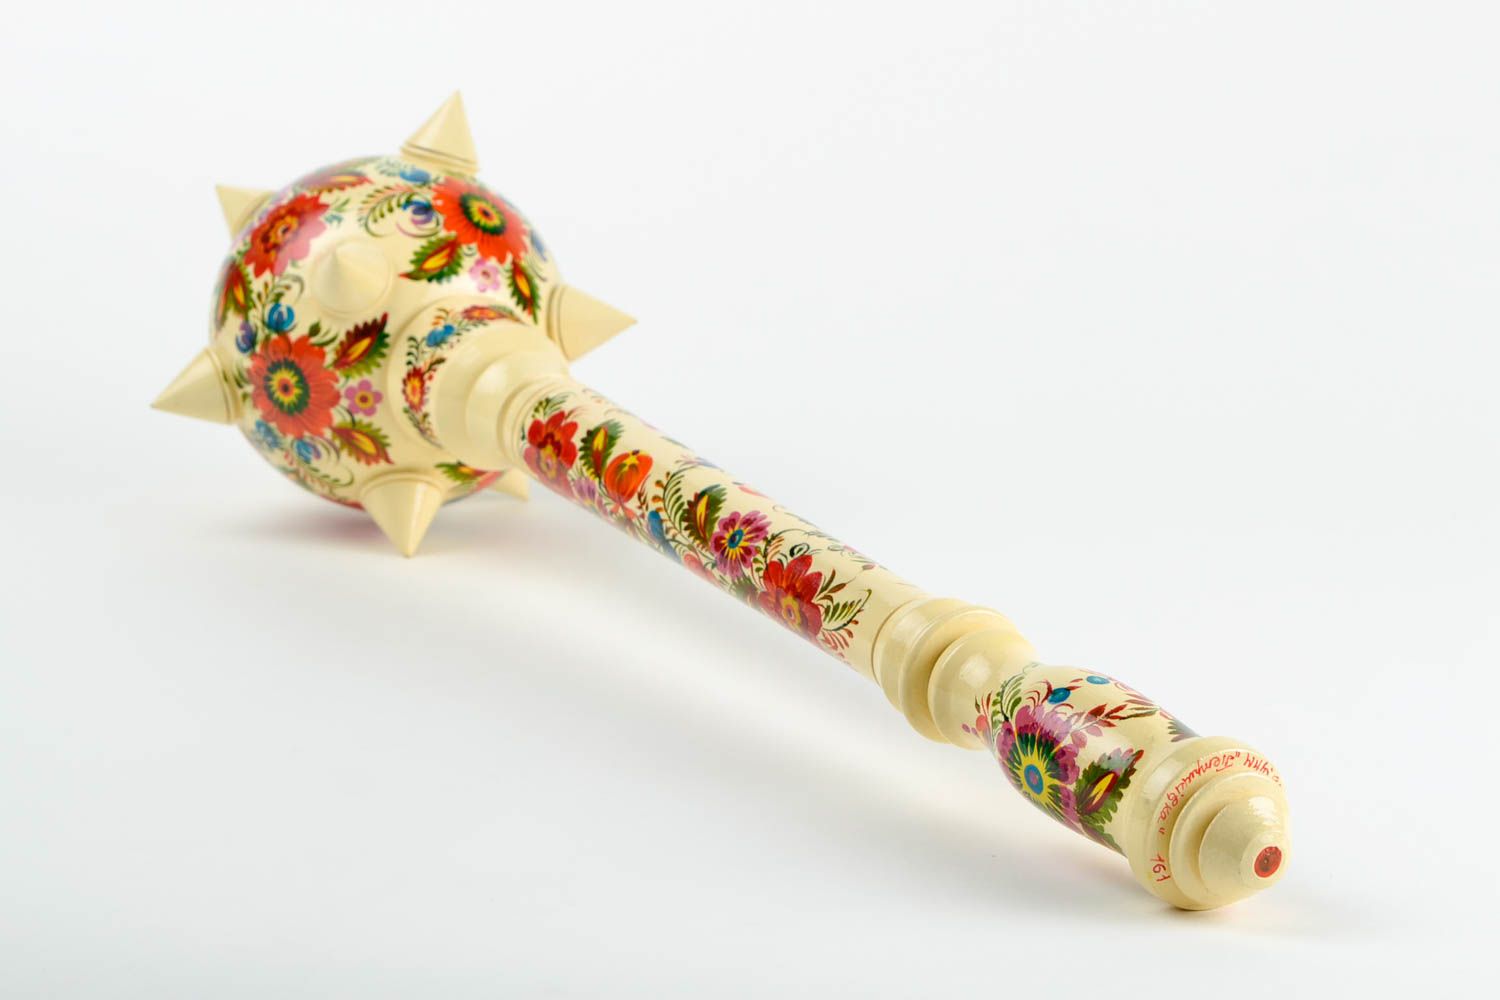 Handmade wooden mace weapon decorative painted mace decorative use only photo 5